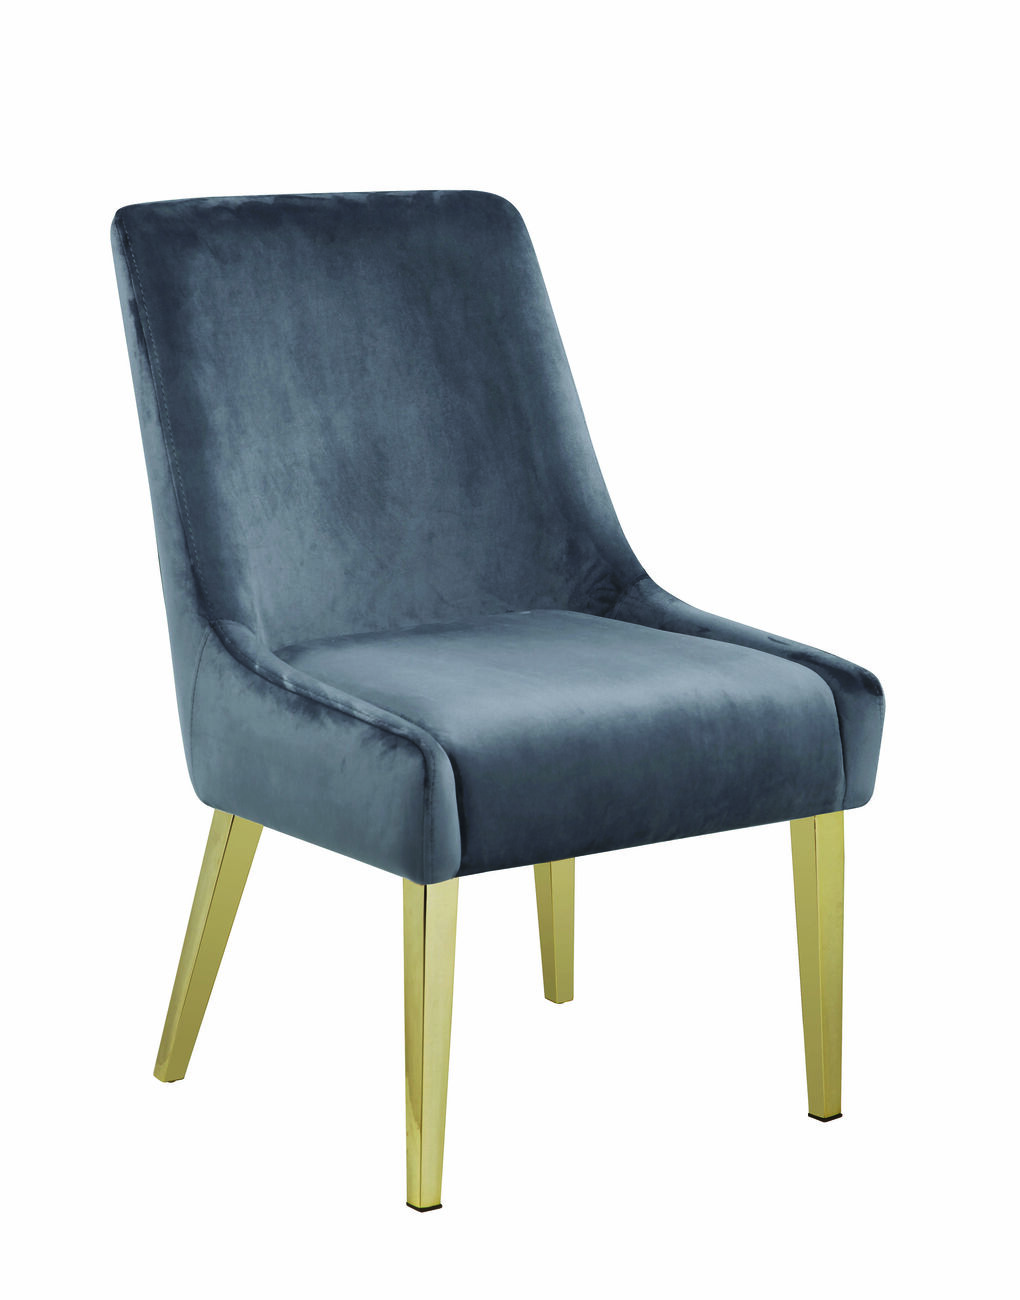 Metal Framed Dining Chair with Velvet Upholstered Seat and Back, Gray and Gold, Set of Two